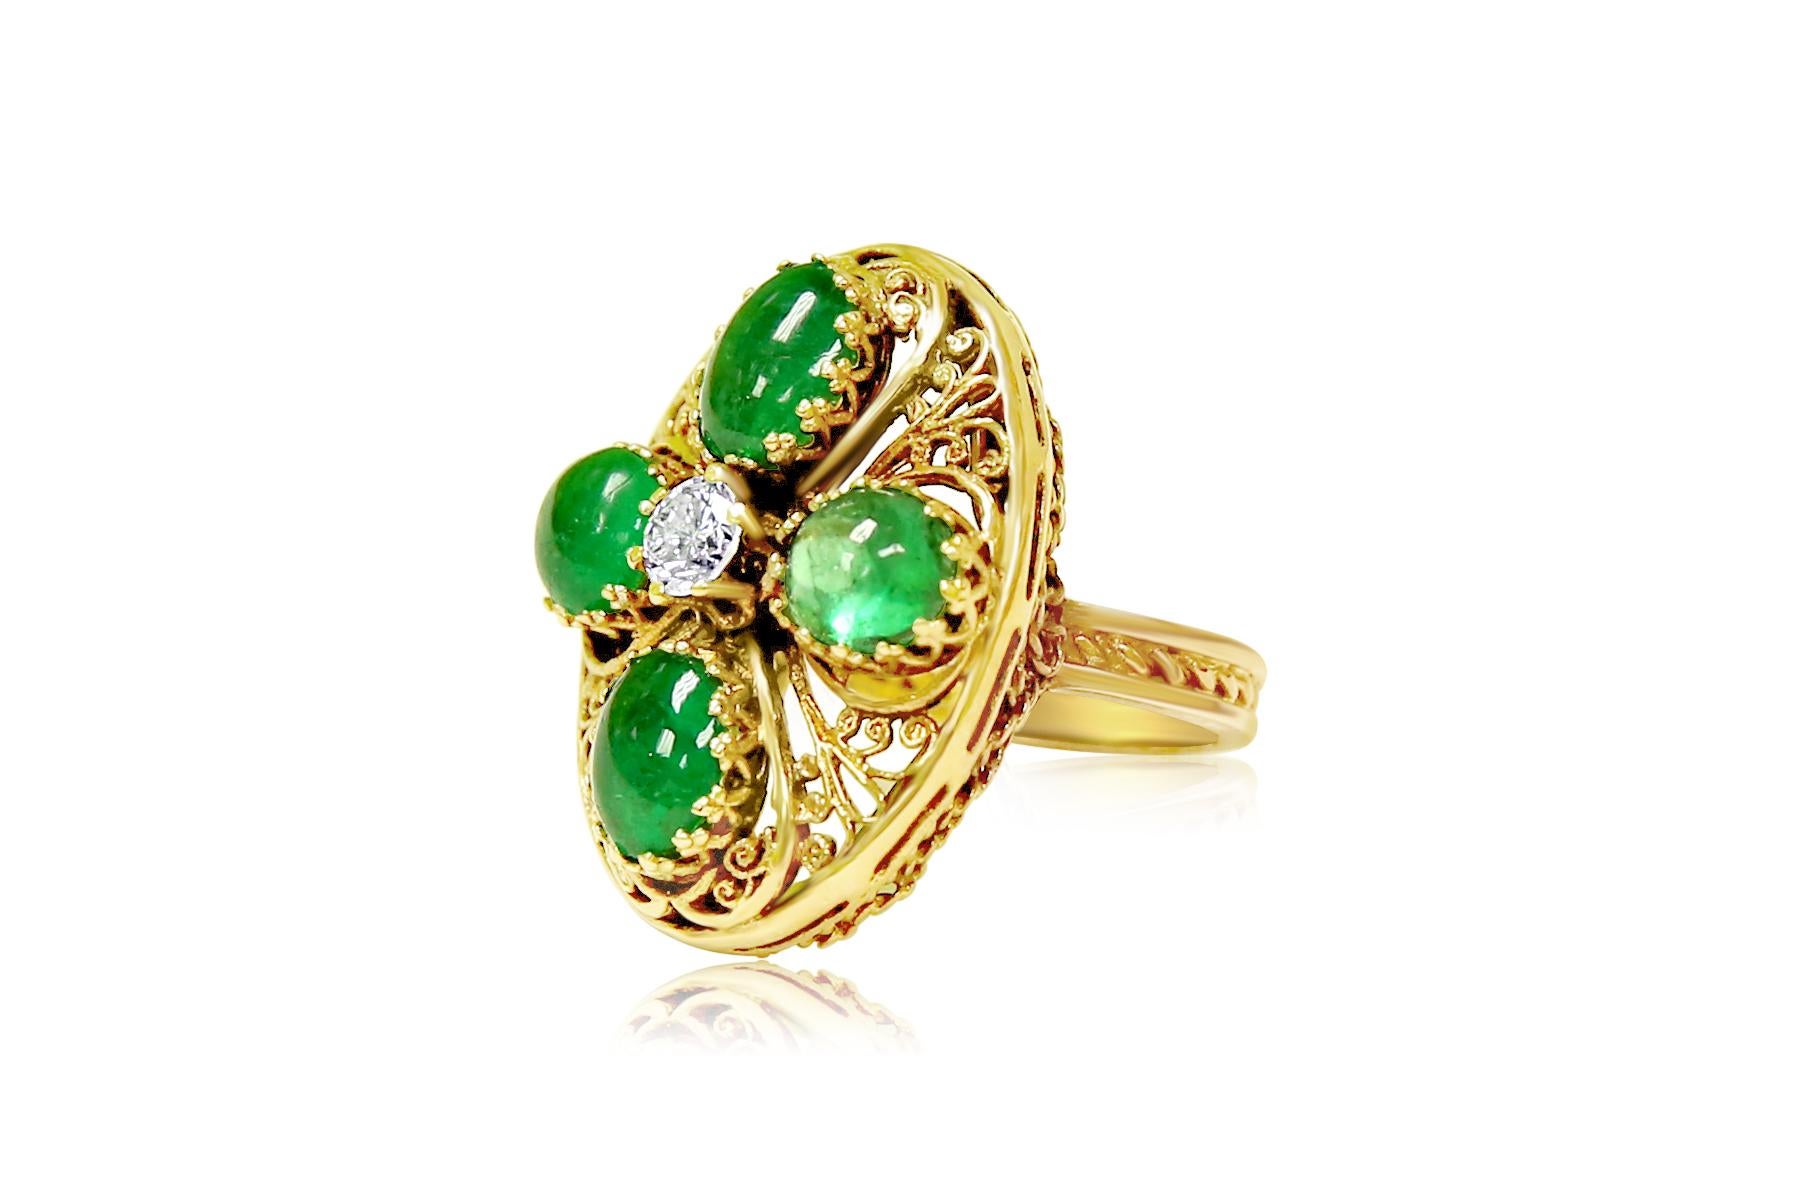 Metal: 14K Yellow Gold. 

Emerald: 8.00 carats total. 100% natural earth mined Emerald. Cabochon cut set in prongs. 

Diamonds: 1/2 carat diamonds. Round brilliant cut diamonds in prongs. 100% natural earth mined.

Artistic vintage style ring. 